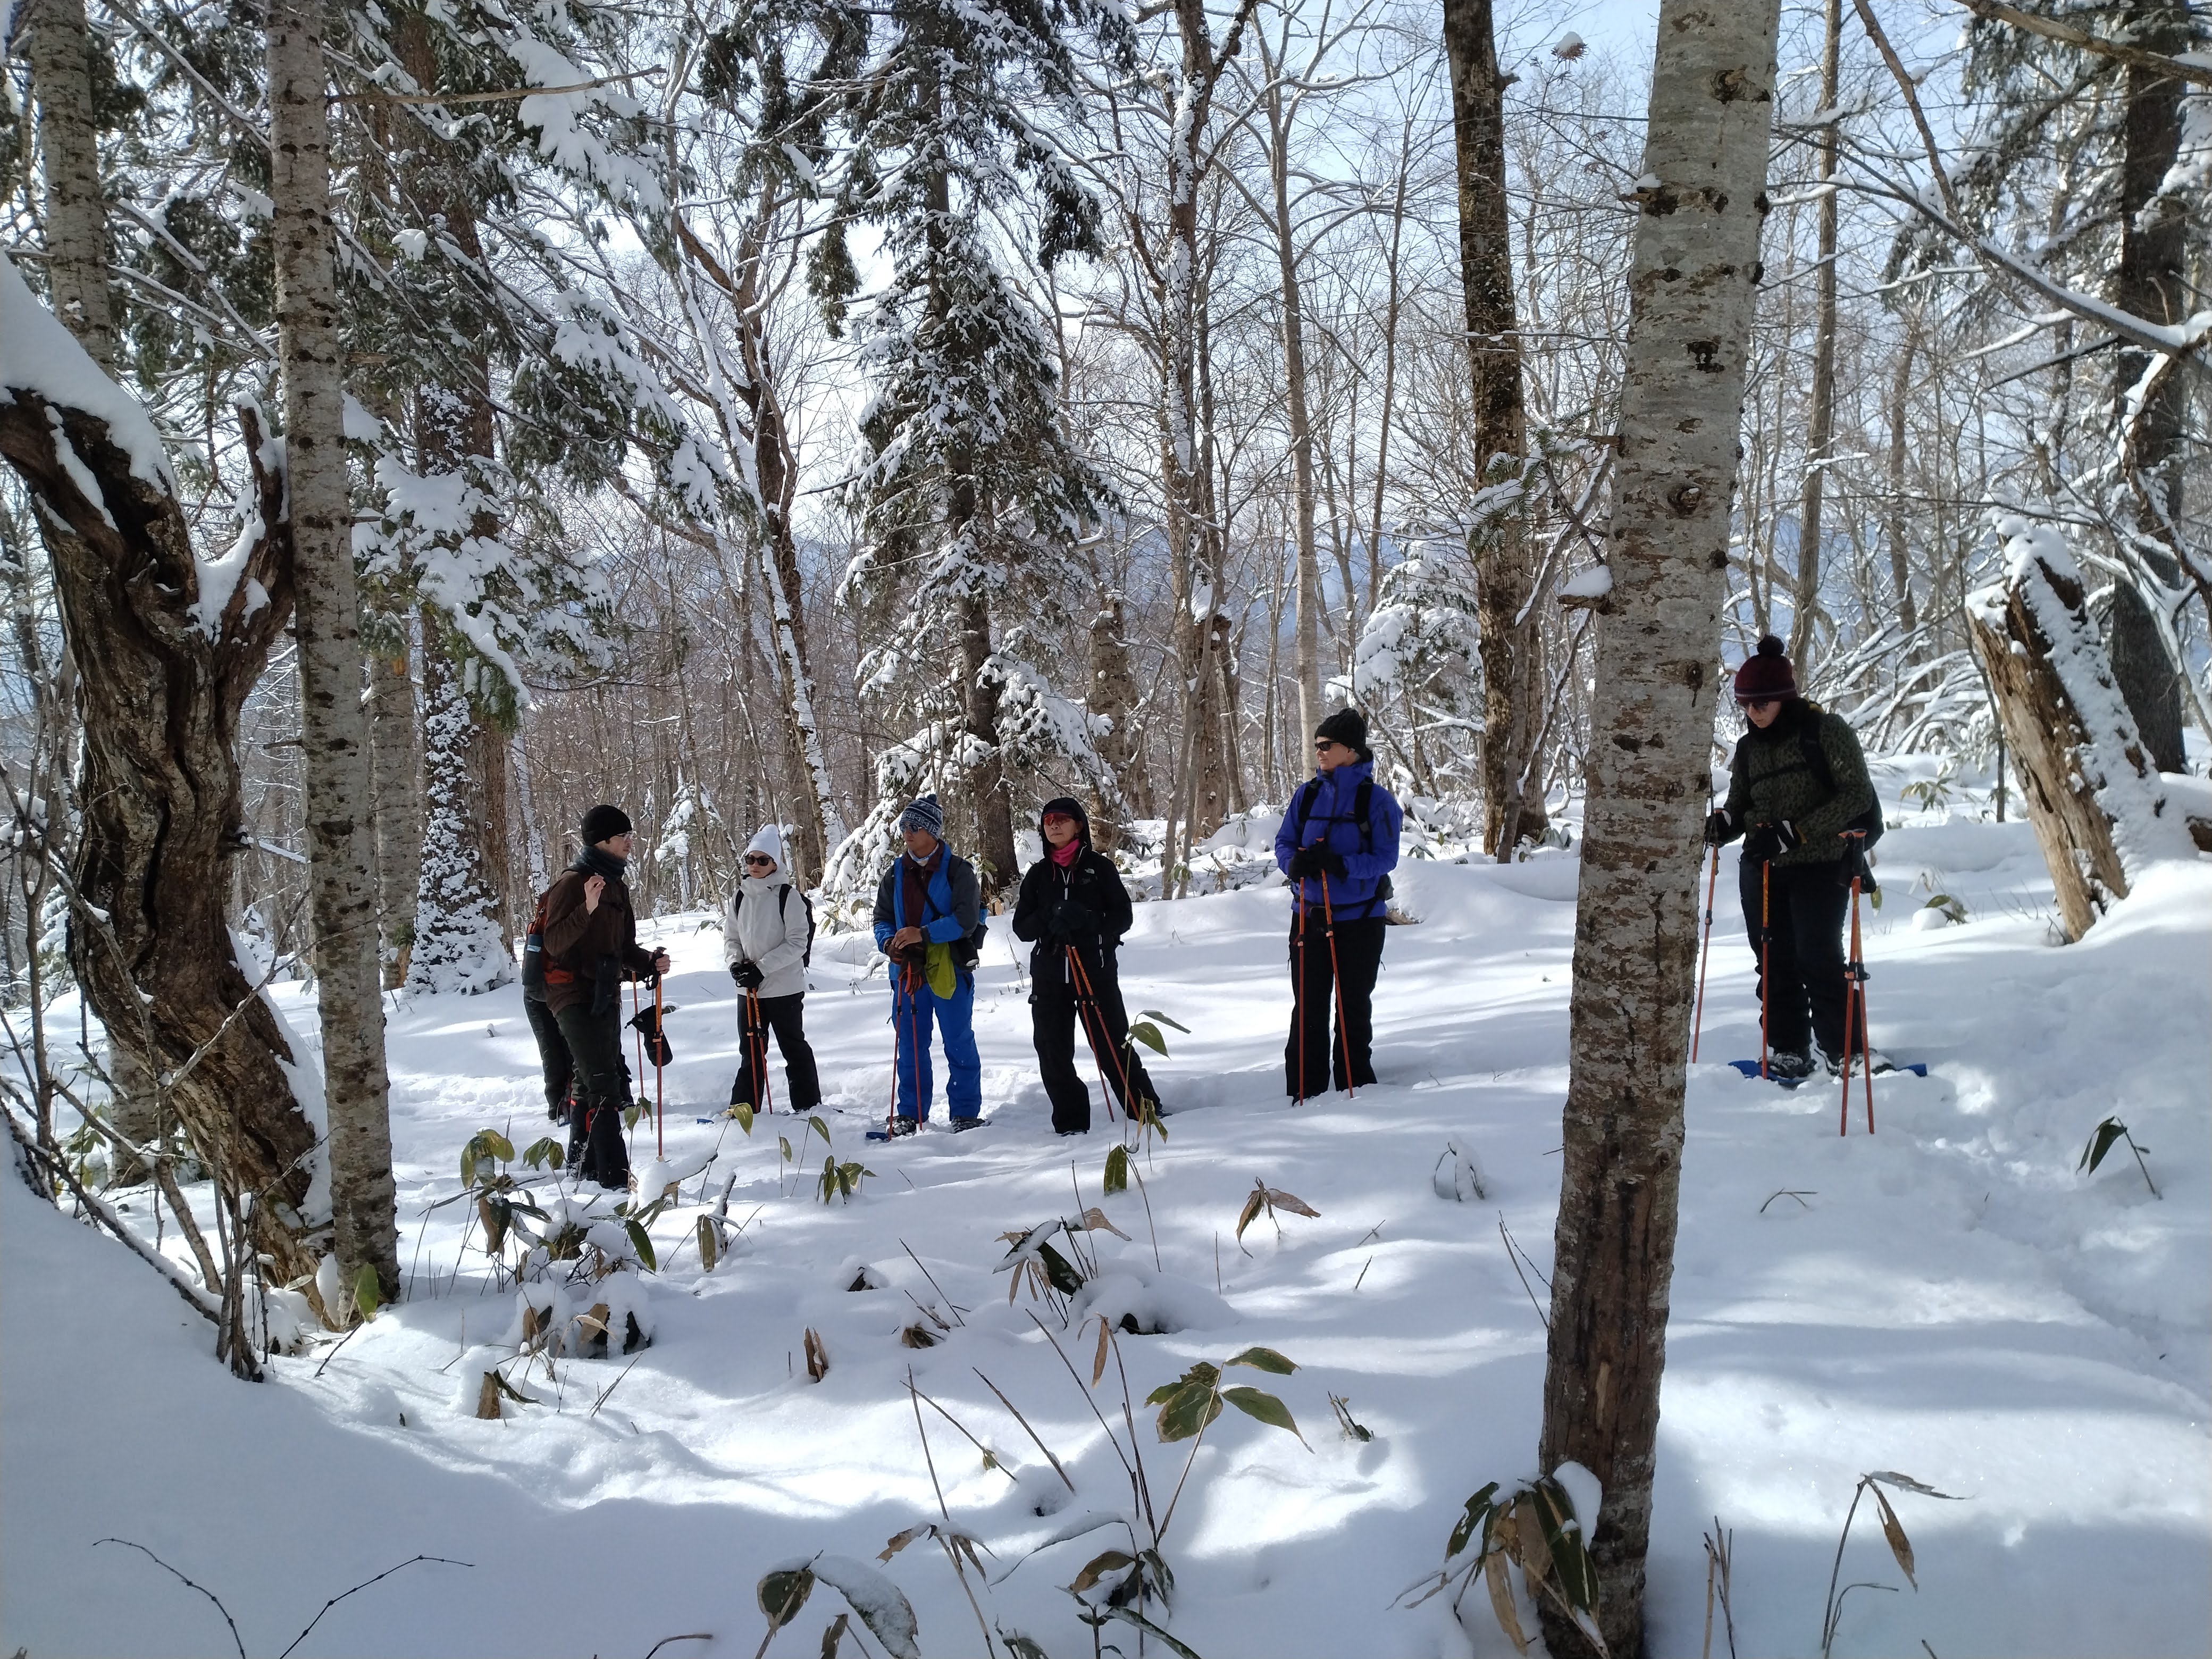 A guide explains natural features to guests while snowshoeing through the forest at Wakoto Peninsula.